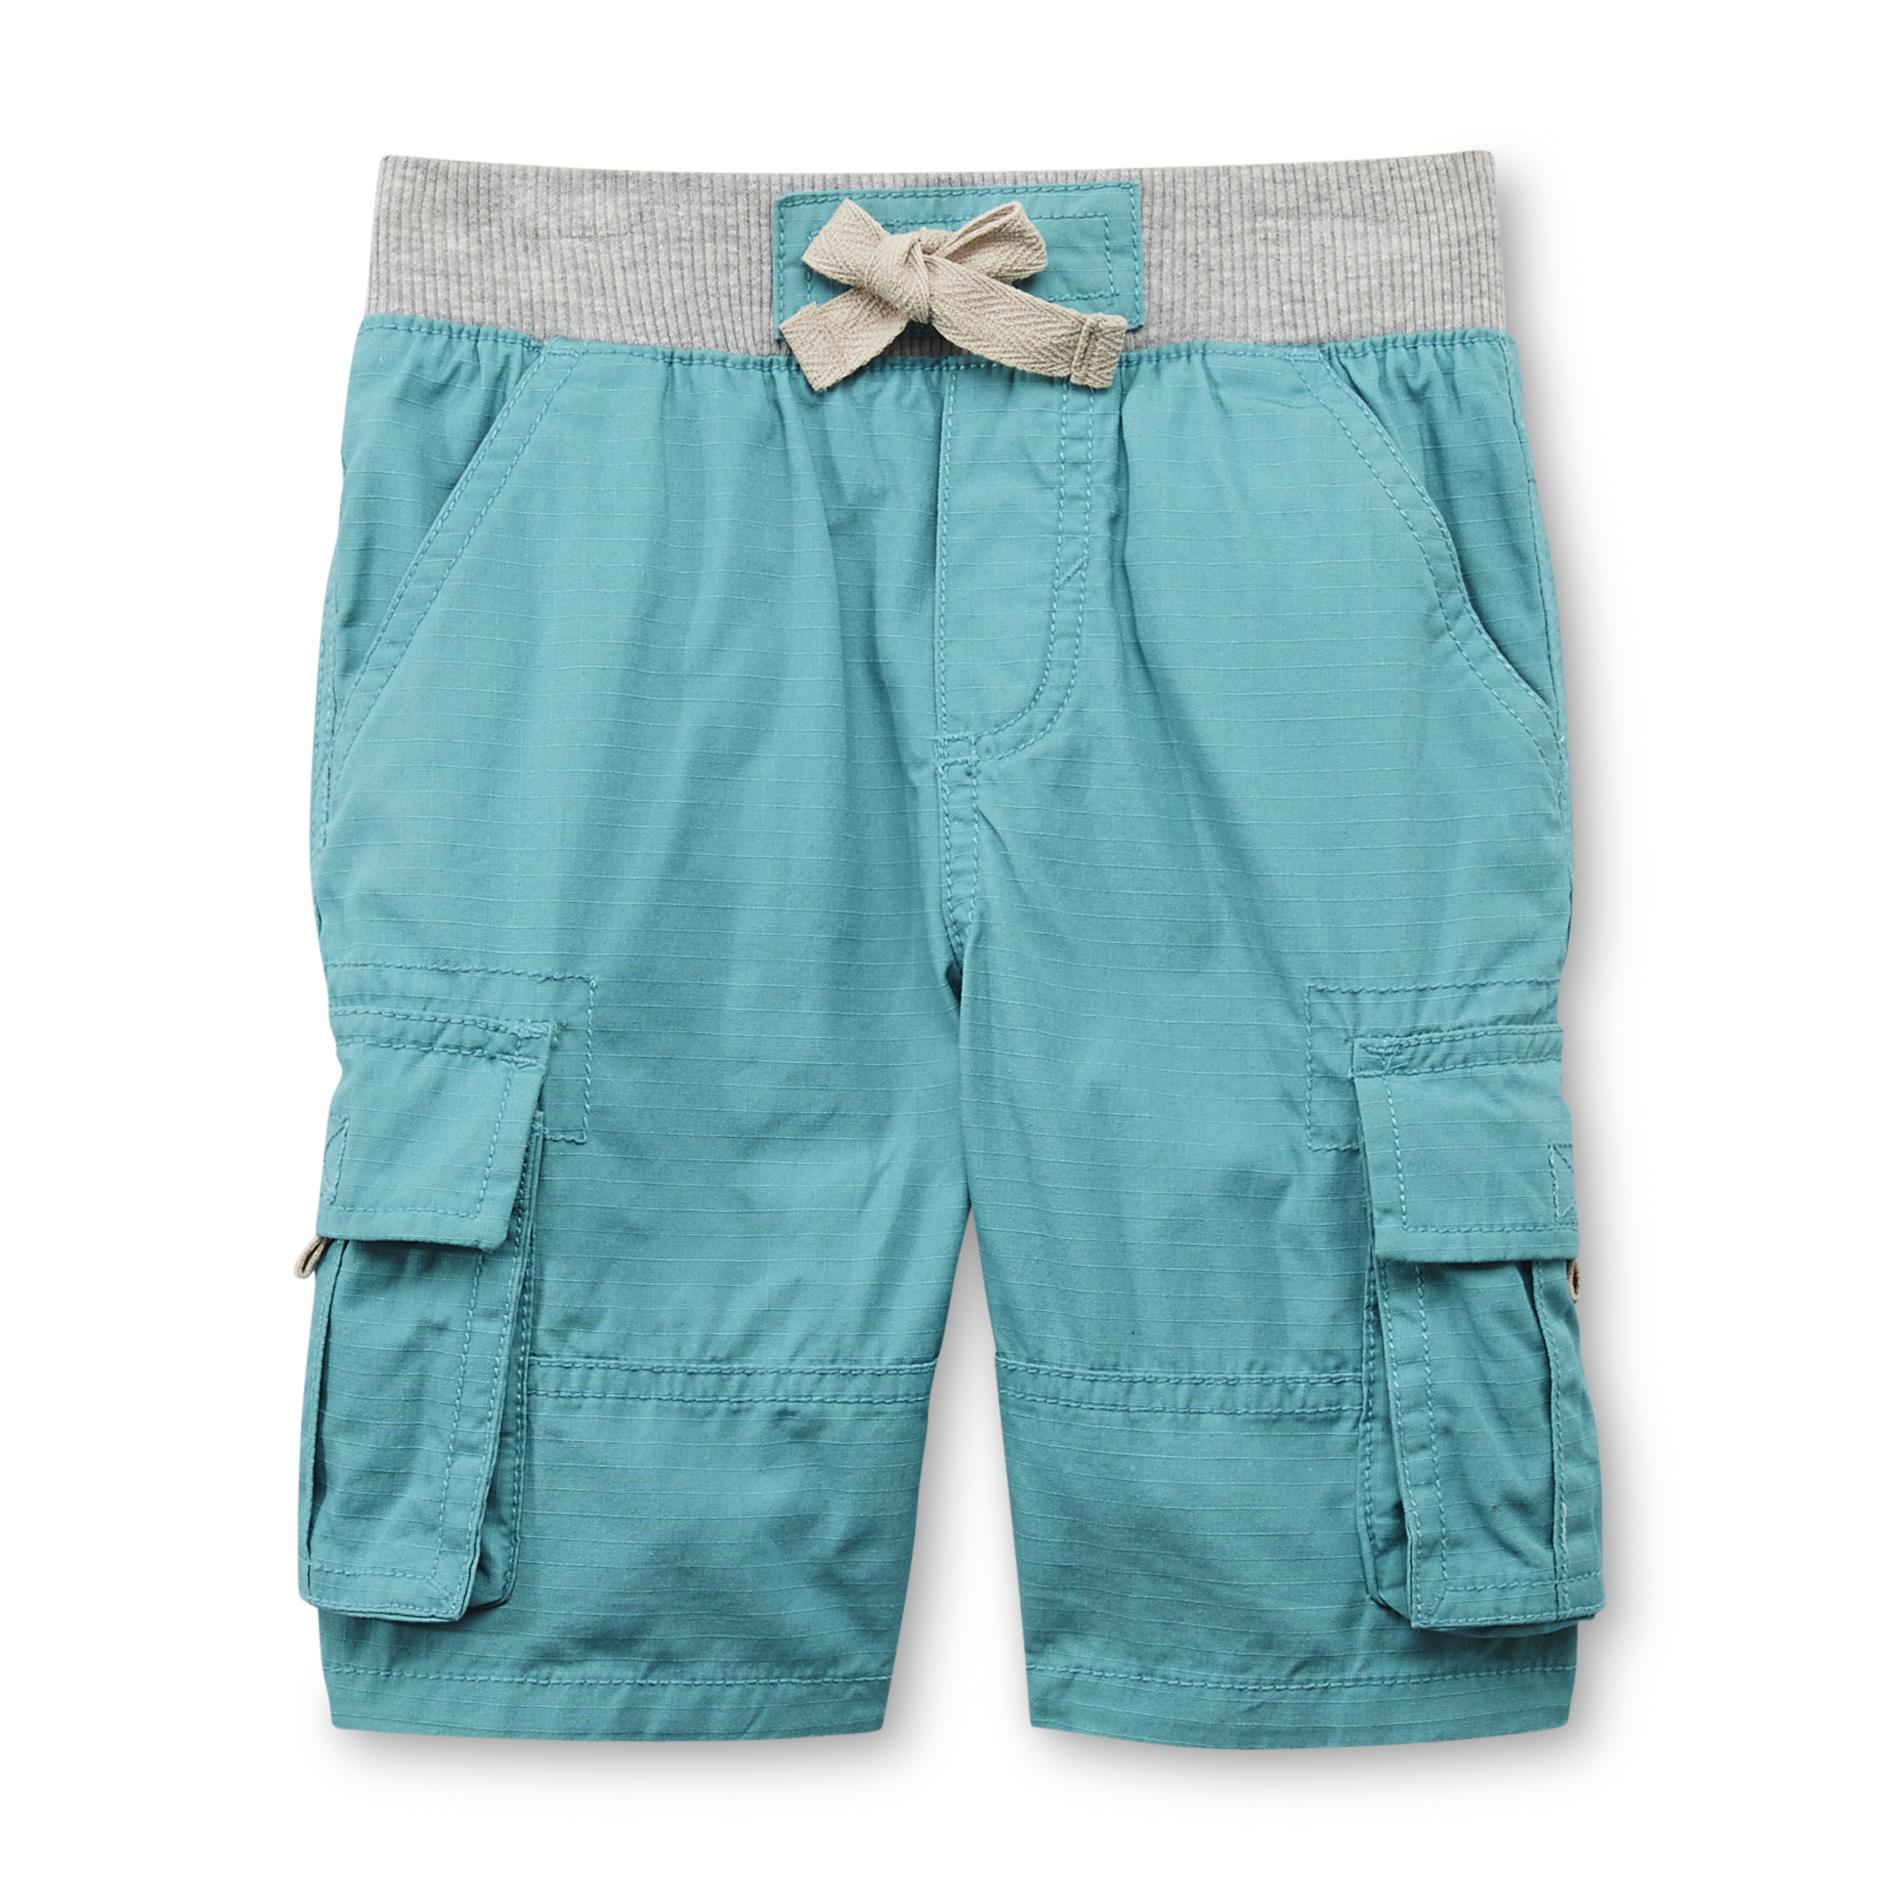 Route 66 Infant & Toddler Girl's Twill Cargo Shorts